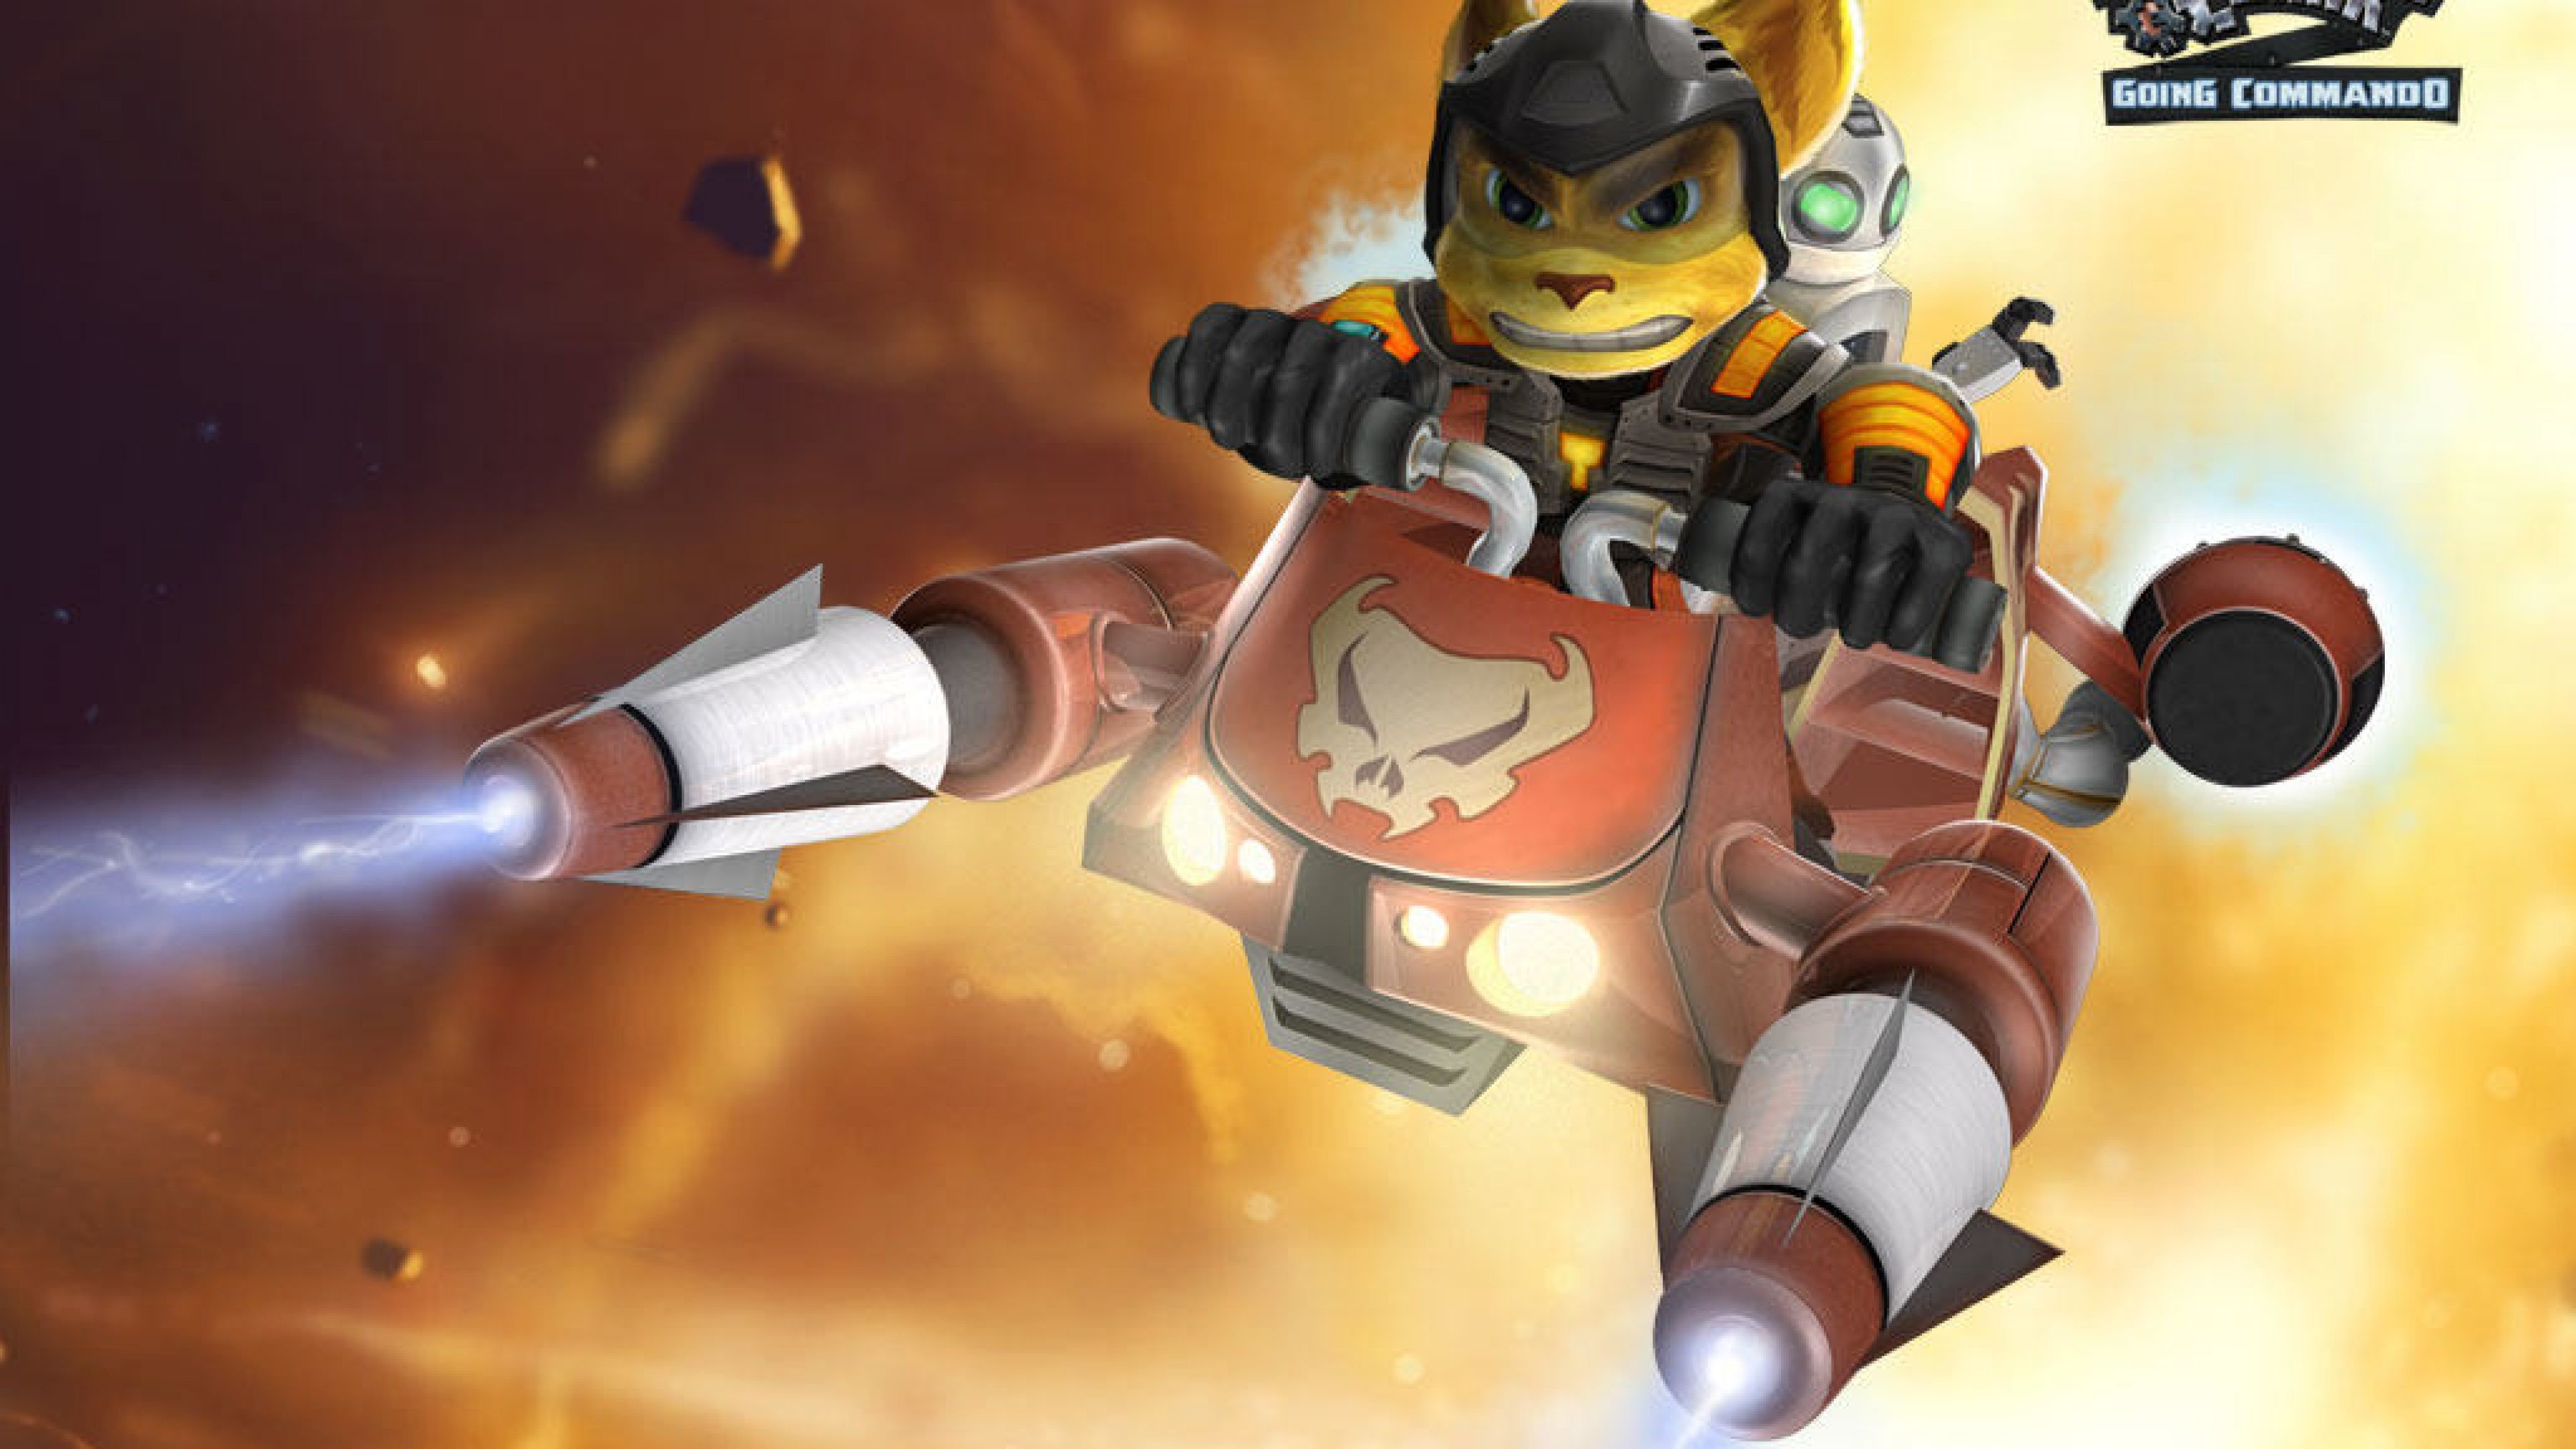 3840x2160 ratchet and clank going commando wallpaper